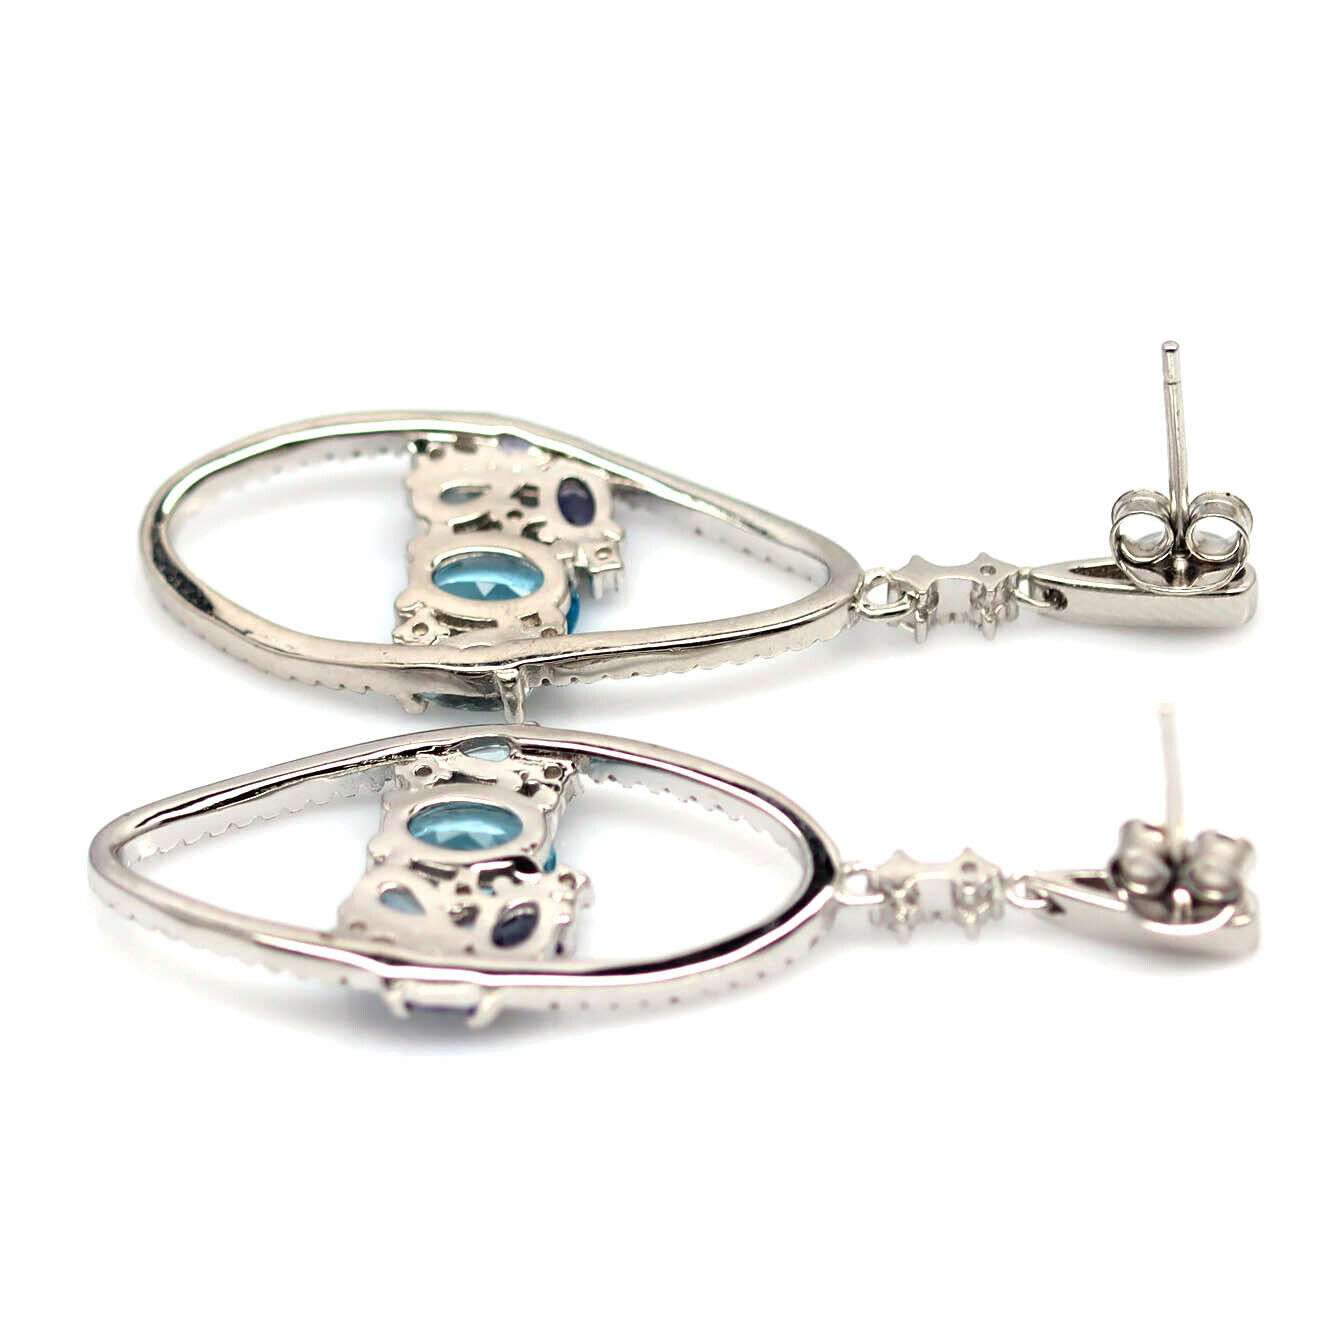 A pair of 925 silver earrings set with blue topaz, tanzanites and white stones, L. 4.5cm. - Image 2 of 2